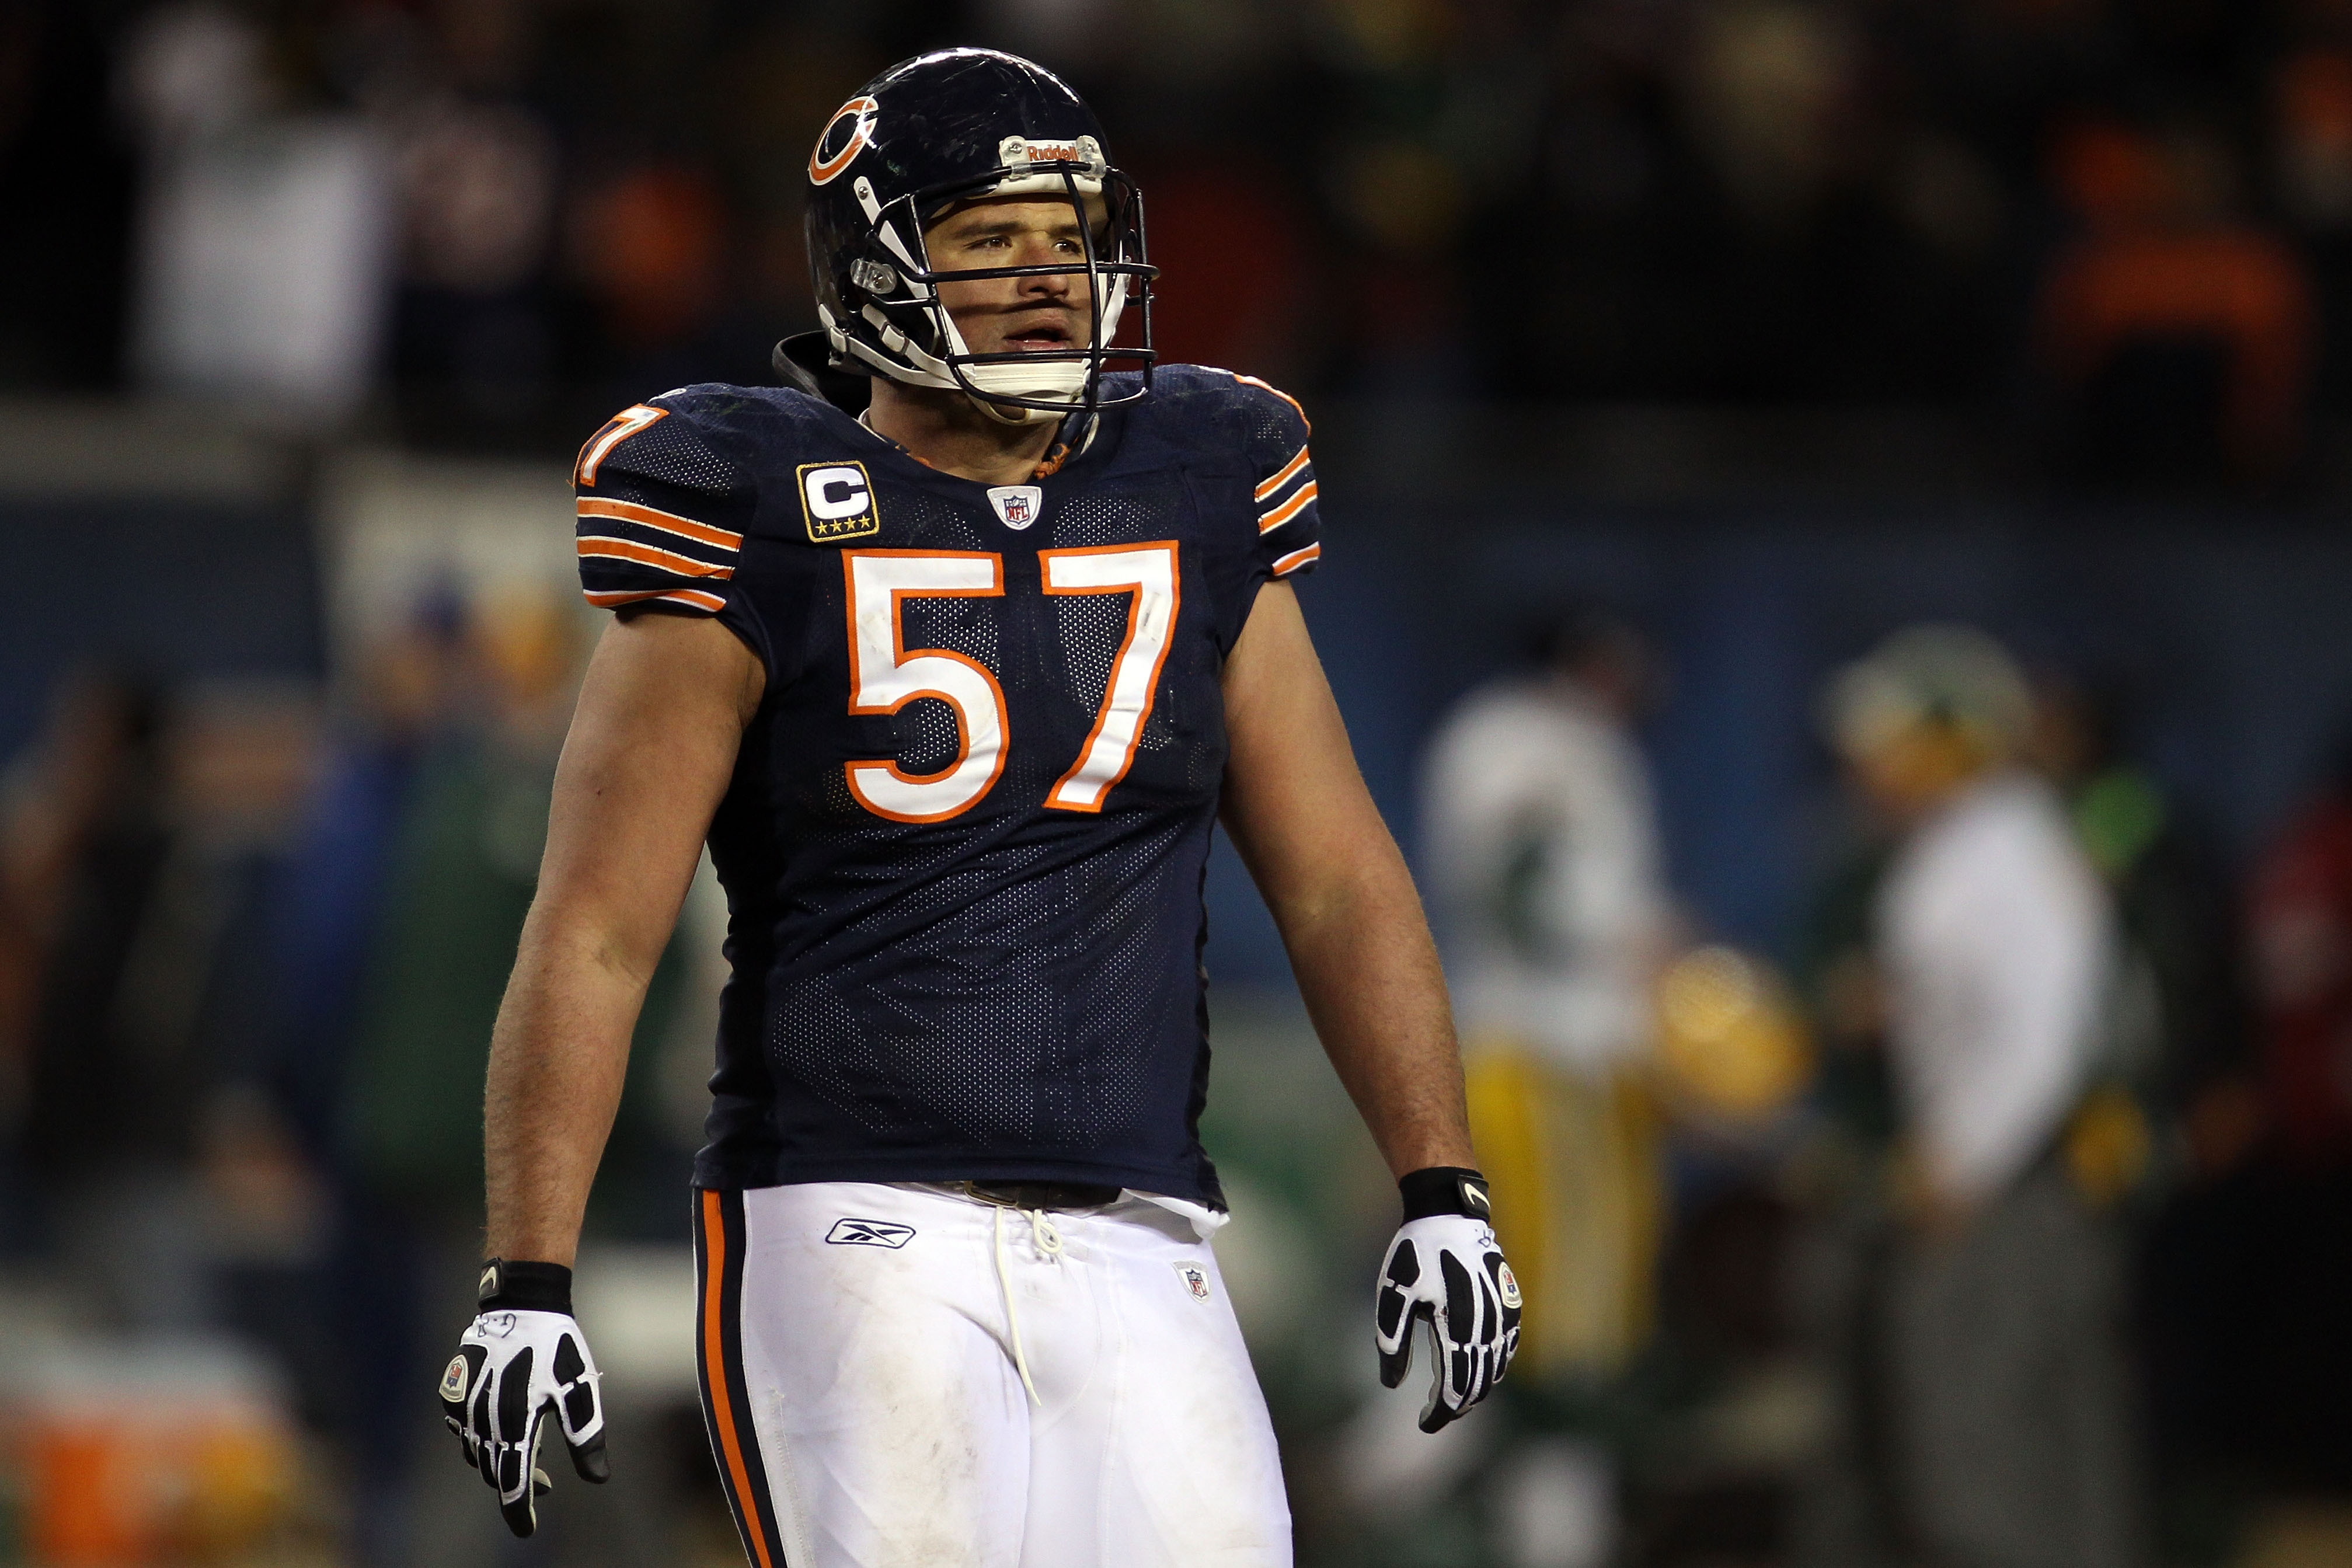 CHICAGO, IL - JANUARY 23:  Olin Kreutz #57 of the Chicago Bears looks on late in the fourth quarter against the Green Bay Packers in the NFC Championship Game at Soldier Field on January 23, 2011 in Chicago, Illinois.  (Photo by Jonathan Daniel/Getty Imag